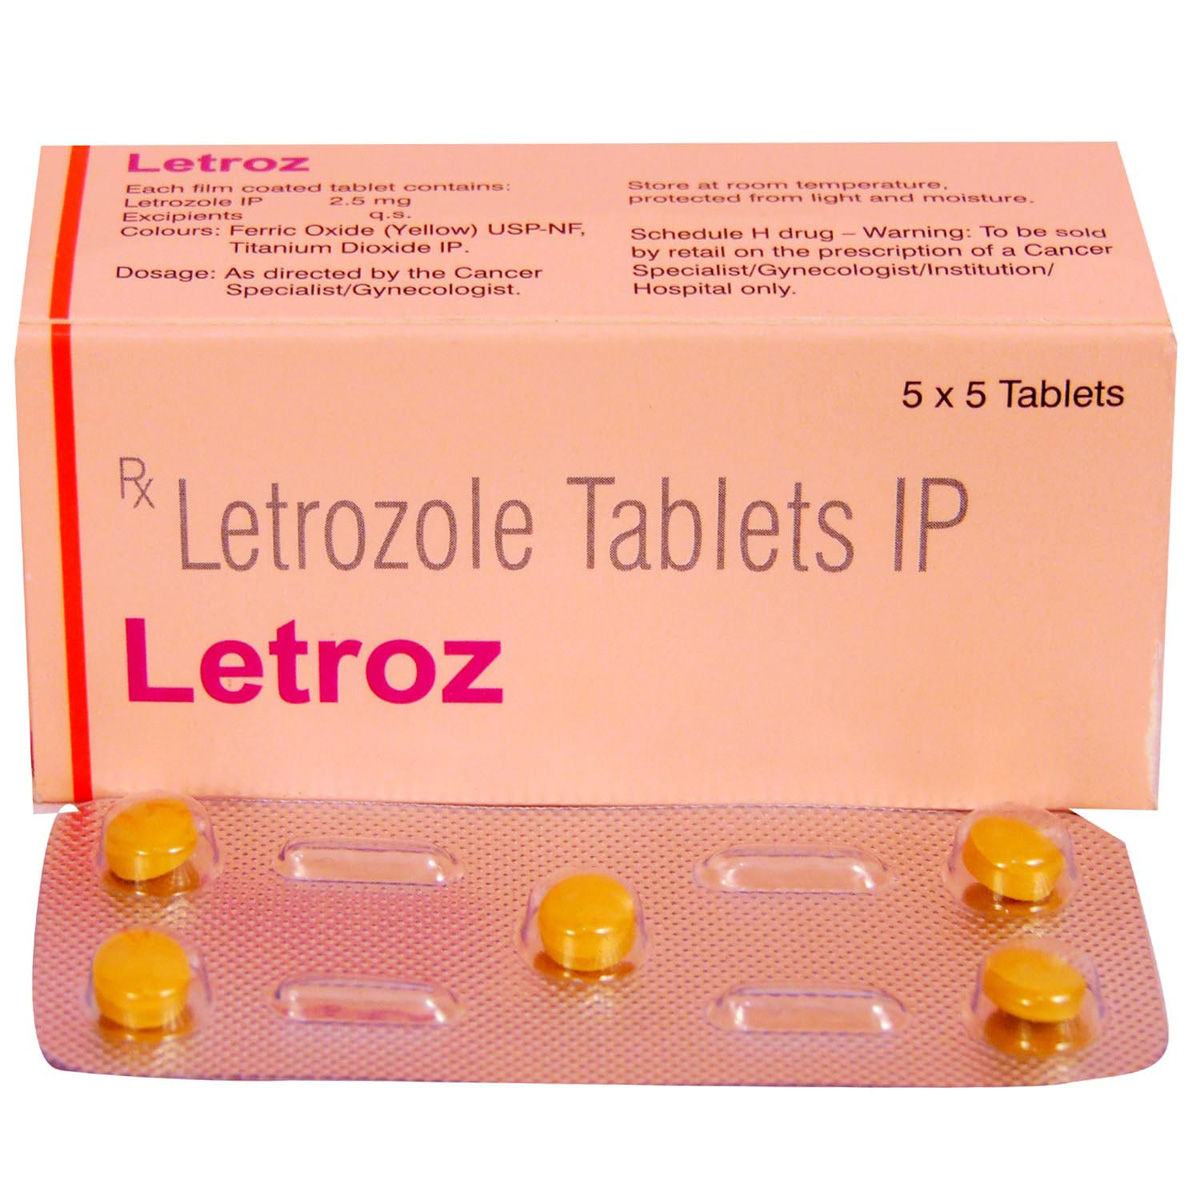 Letroz Tablet | Uses, Side Effects, Price | Apollo Pharmacy